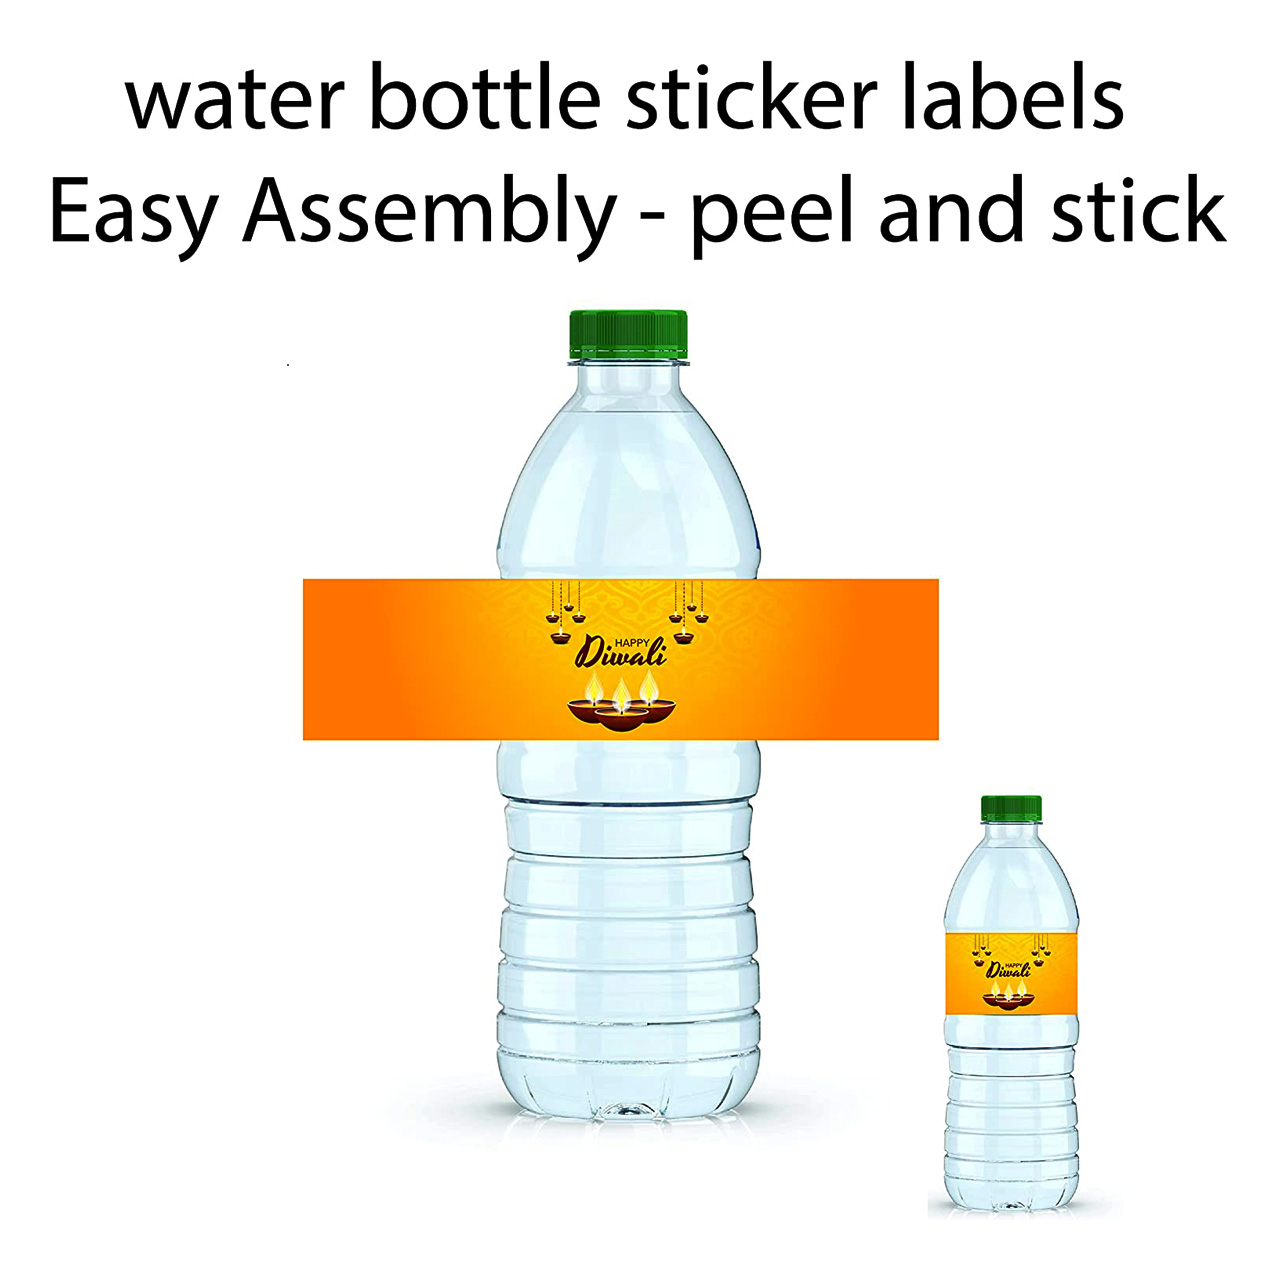 Diwali water bottle labels are professionally printed on a sticker paper with a glossy coating Diwali Water Bottle Sticker Labels INCLUDES 20 DIY water bottle labels Water bottle stickers each SIZE 85 wide x 2 tall perfect for any beverage bottle or container less than 85 in diameter Diwali Water Bottle Labels will make coordinated beverages and Add Diwali Water Bottle Labels to standard water bottles mini water bottles soda bottles and single serving juice containers Note This listing is for water bottle labels only No other items or staging items included